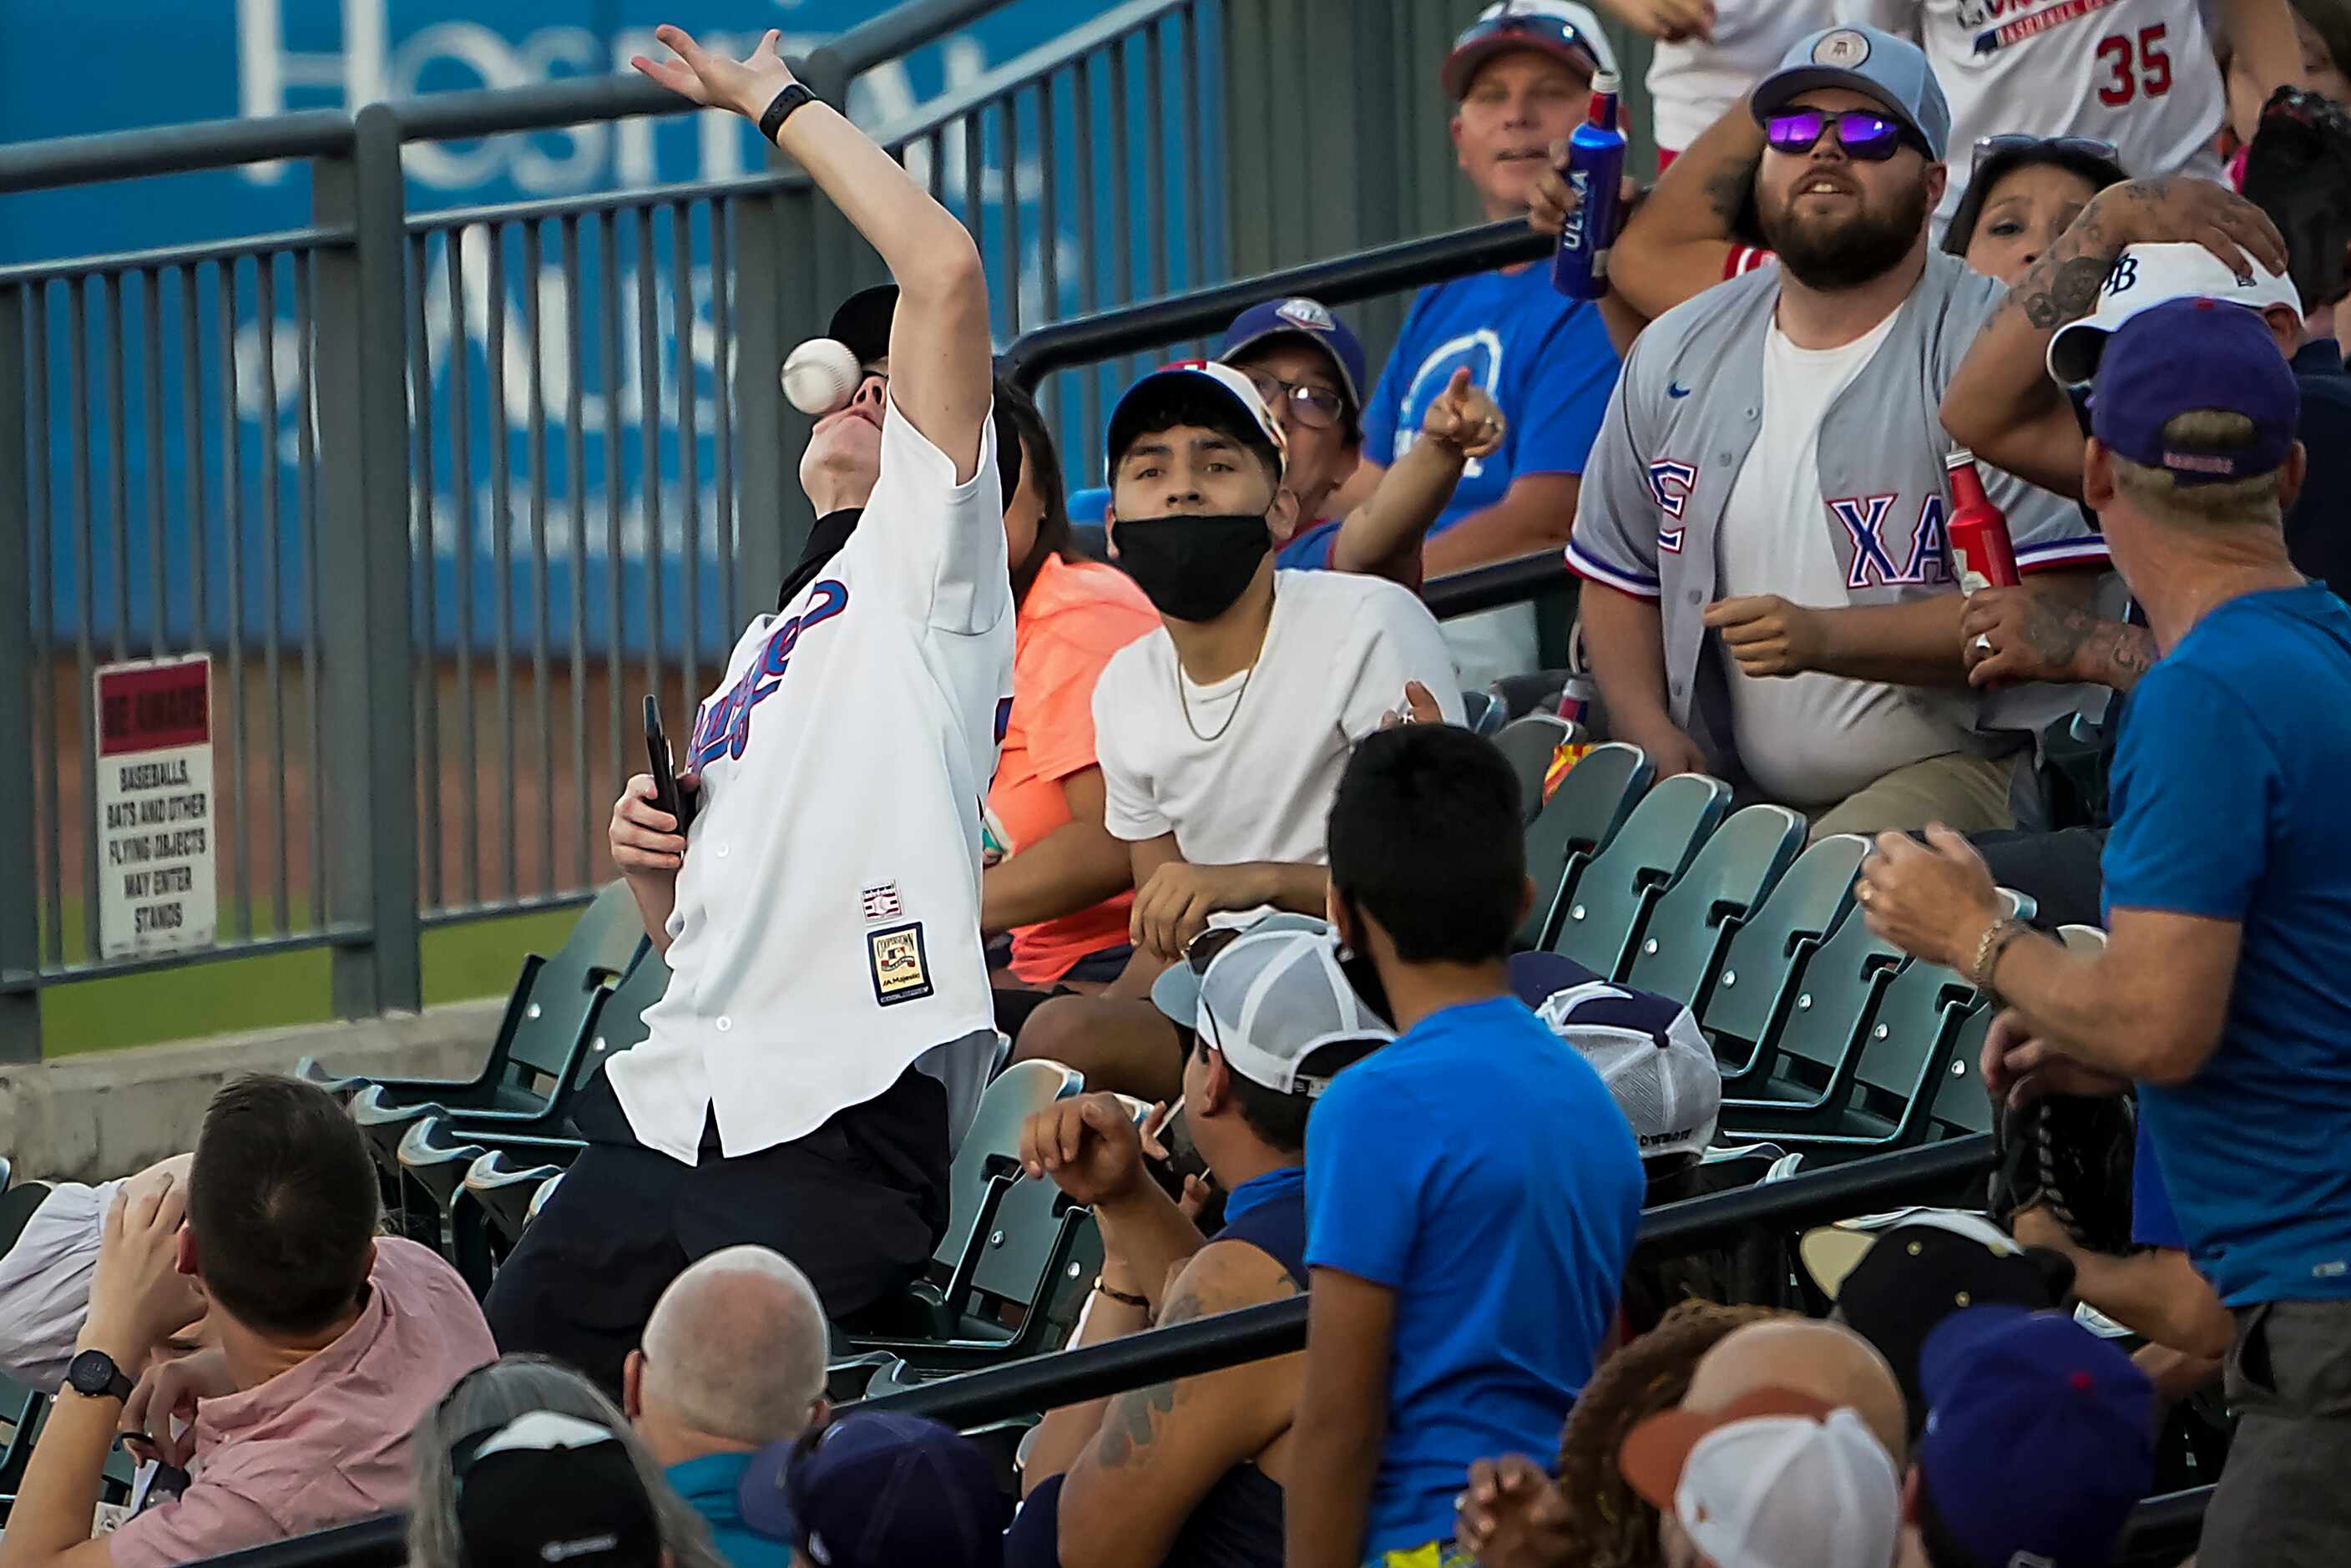 Fan Nolan Phillips is hit in the face as he tries to catch a foul ball of the bat of Round...